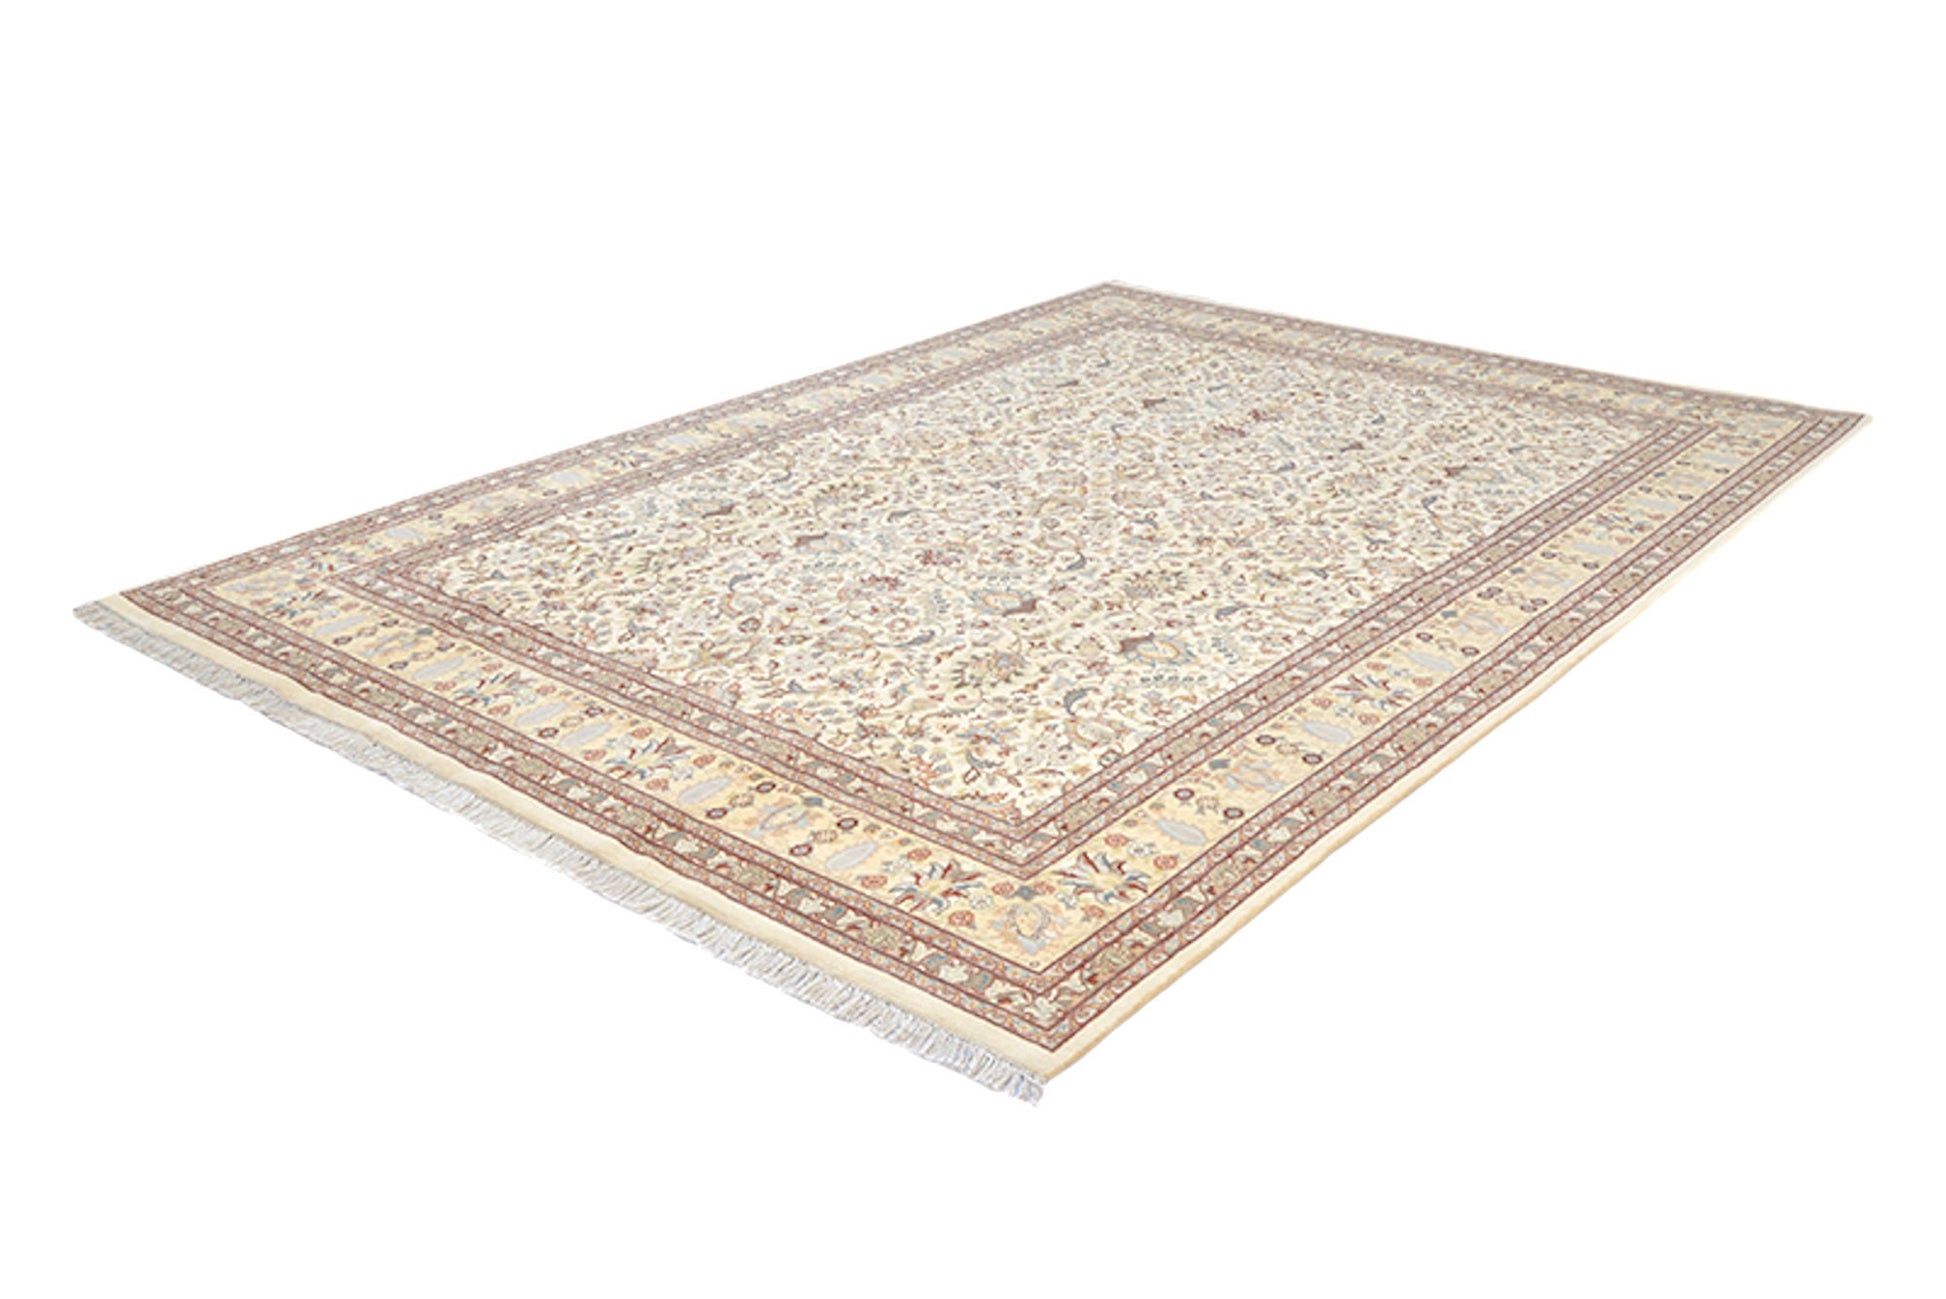 Large Neutral Beige 8 x 11 Handmade Area Rug | Thick Border | Oriental Persian Design | Traditional Style